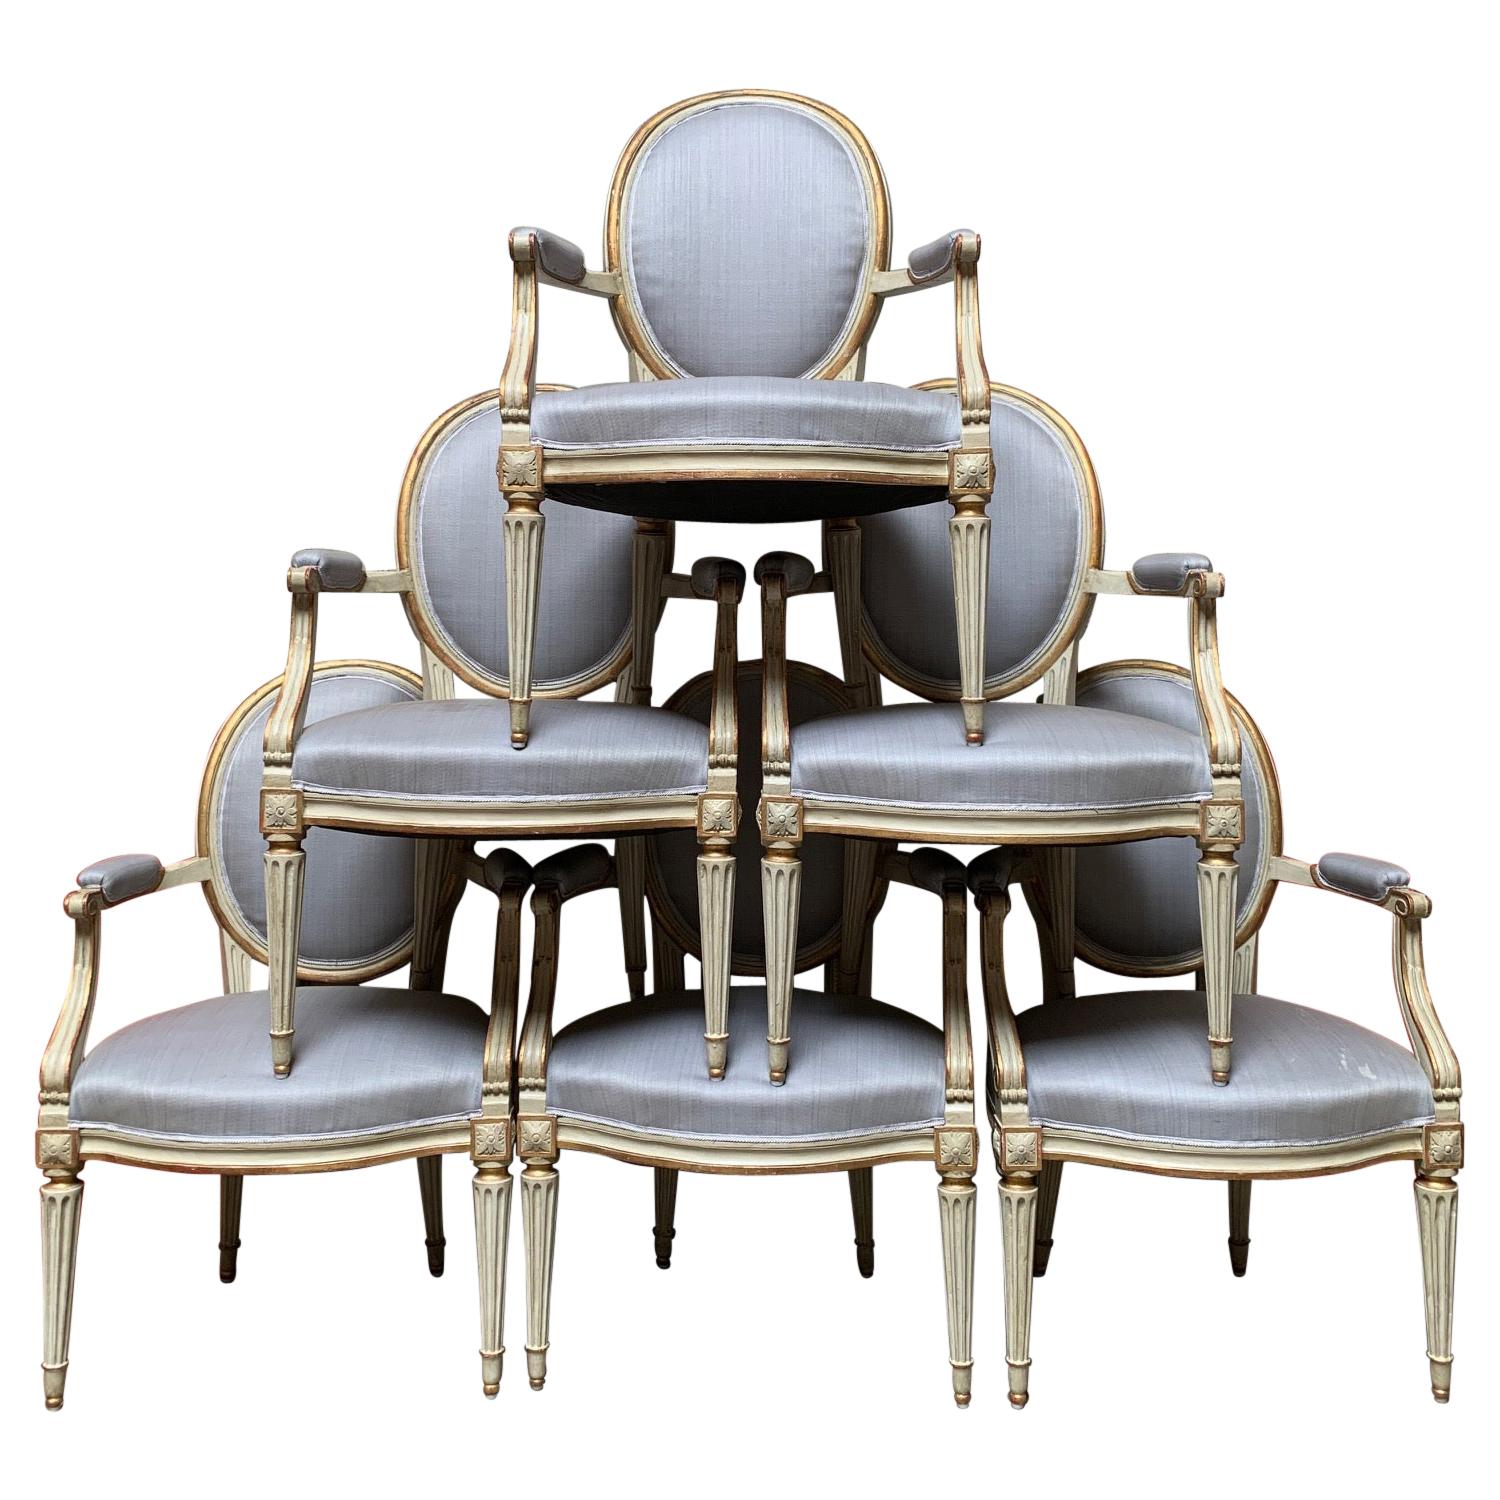 18th Century Set of Six Louis XVI Armchairs with a Gray and Gold Leaf Finish